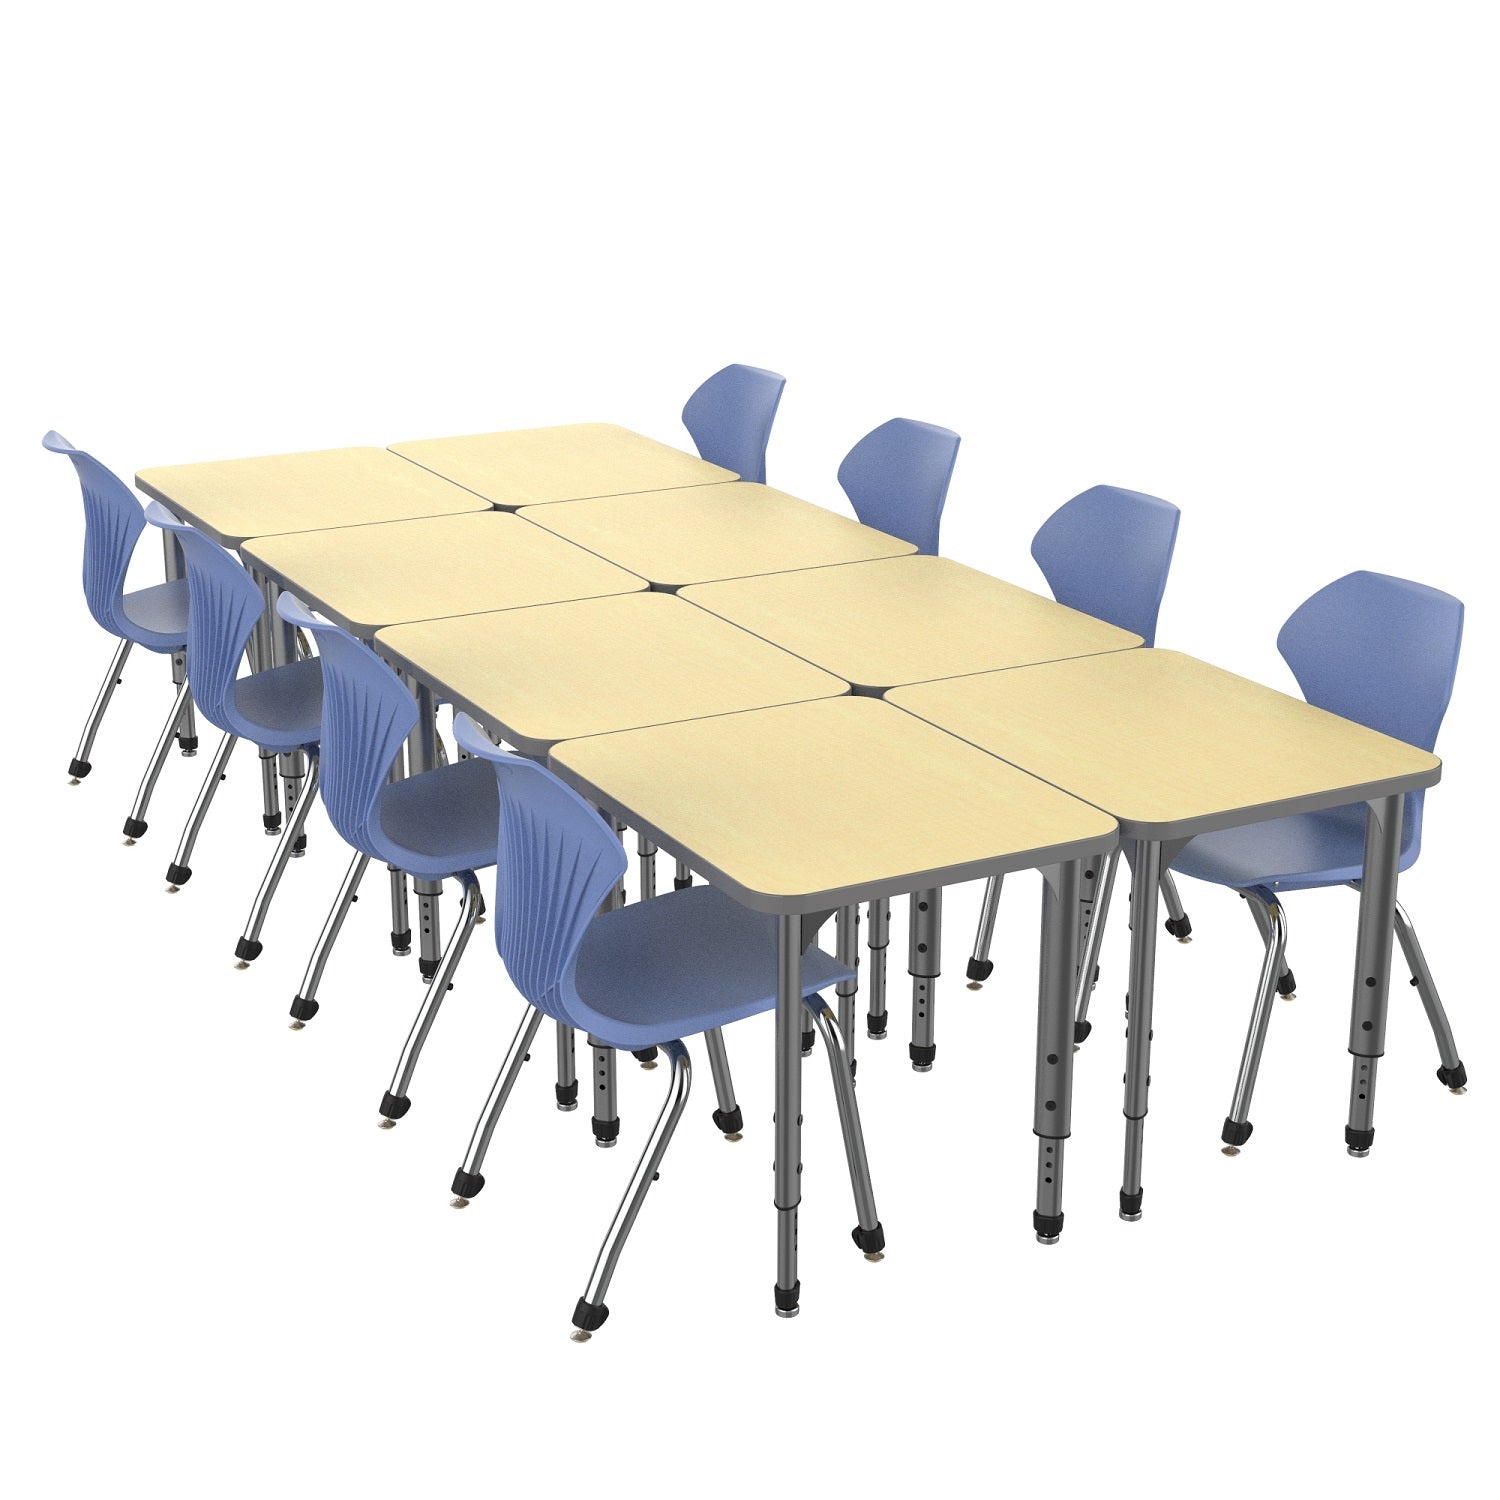 Apex Classroom Desk and Chair Package, 8 Rectangle Collaborative Student Desks, 24" x 30", with 8 Apex Stack Chairs